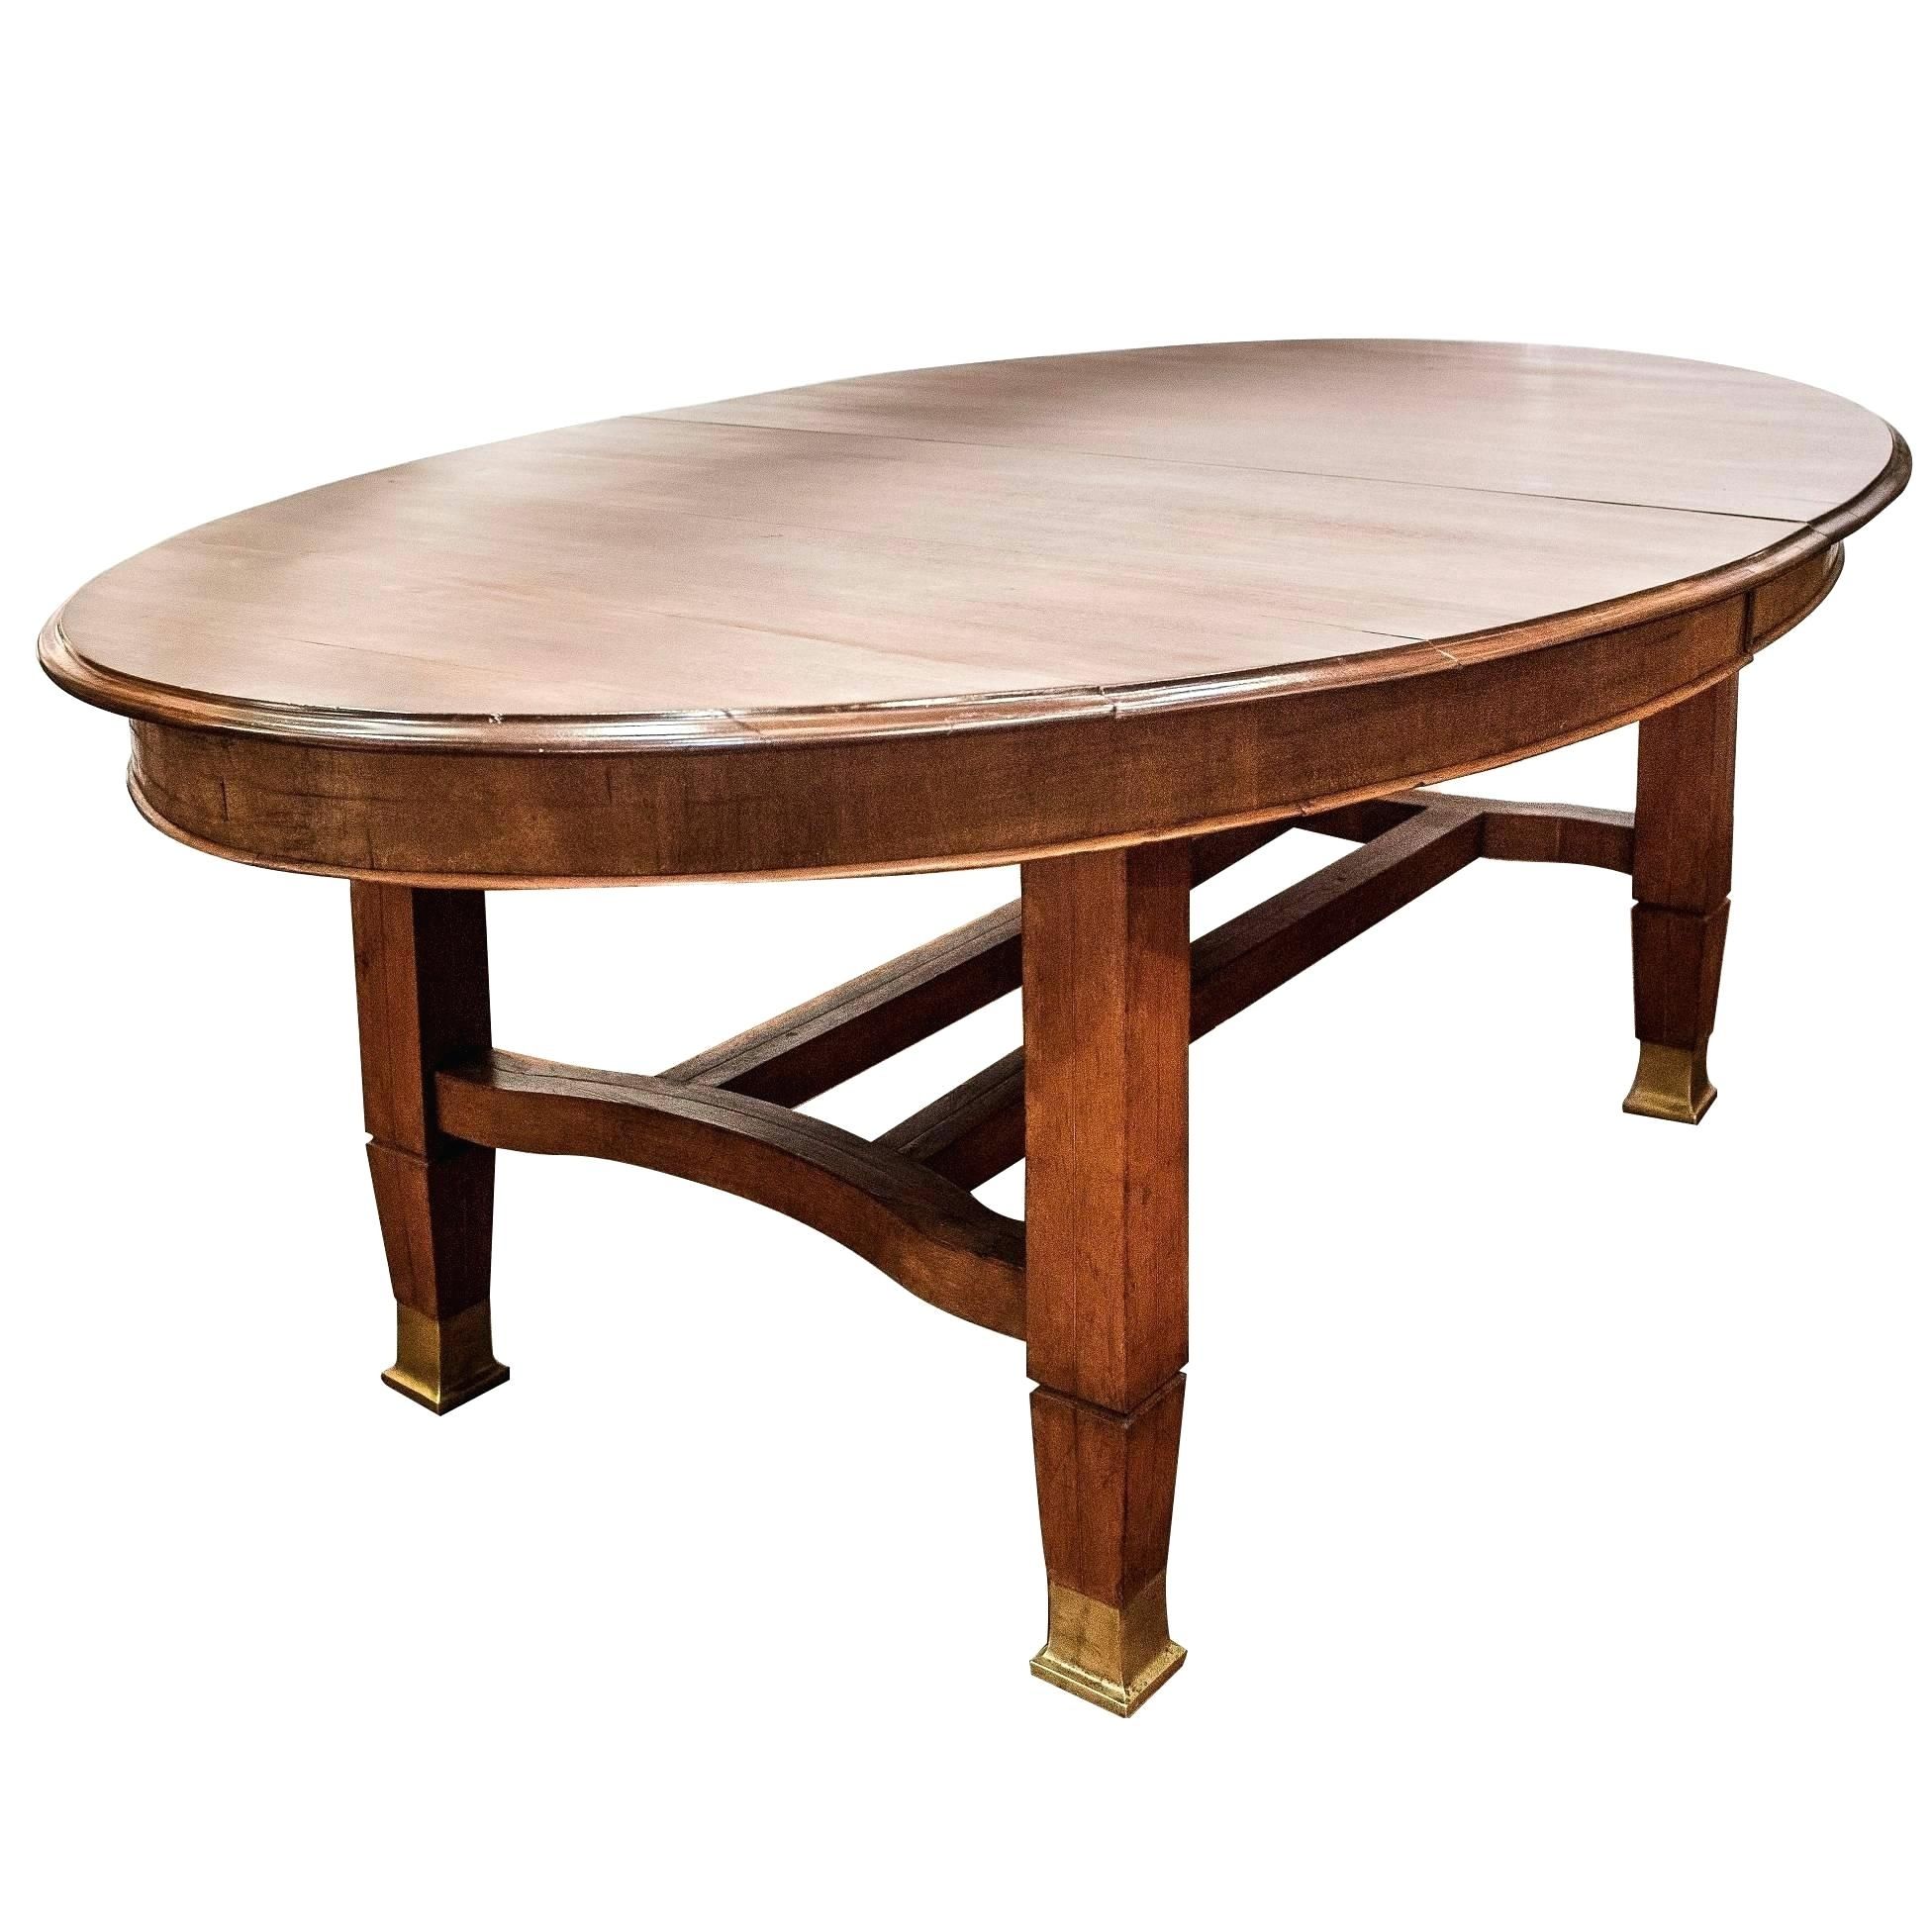 English Dining Table Magnolia Homeroom Country Oval Oak And For Newest Magnolia Home English Country Oval Dining Tables (View 9 of 20)